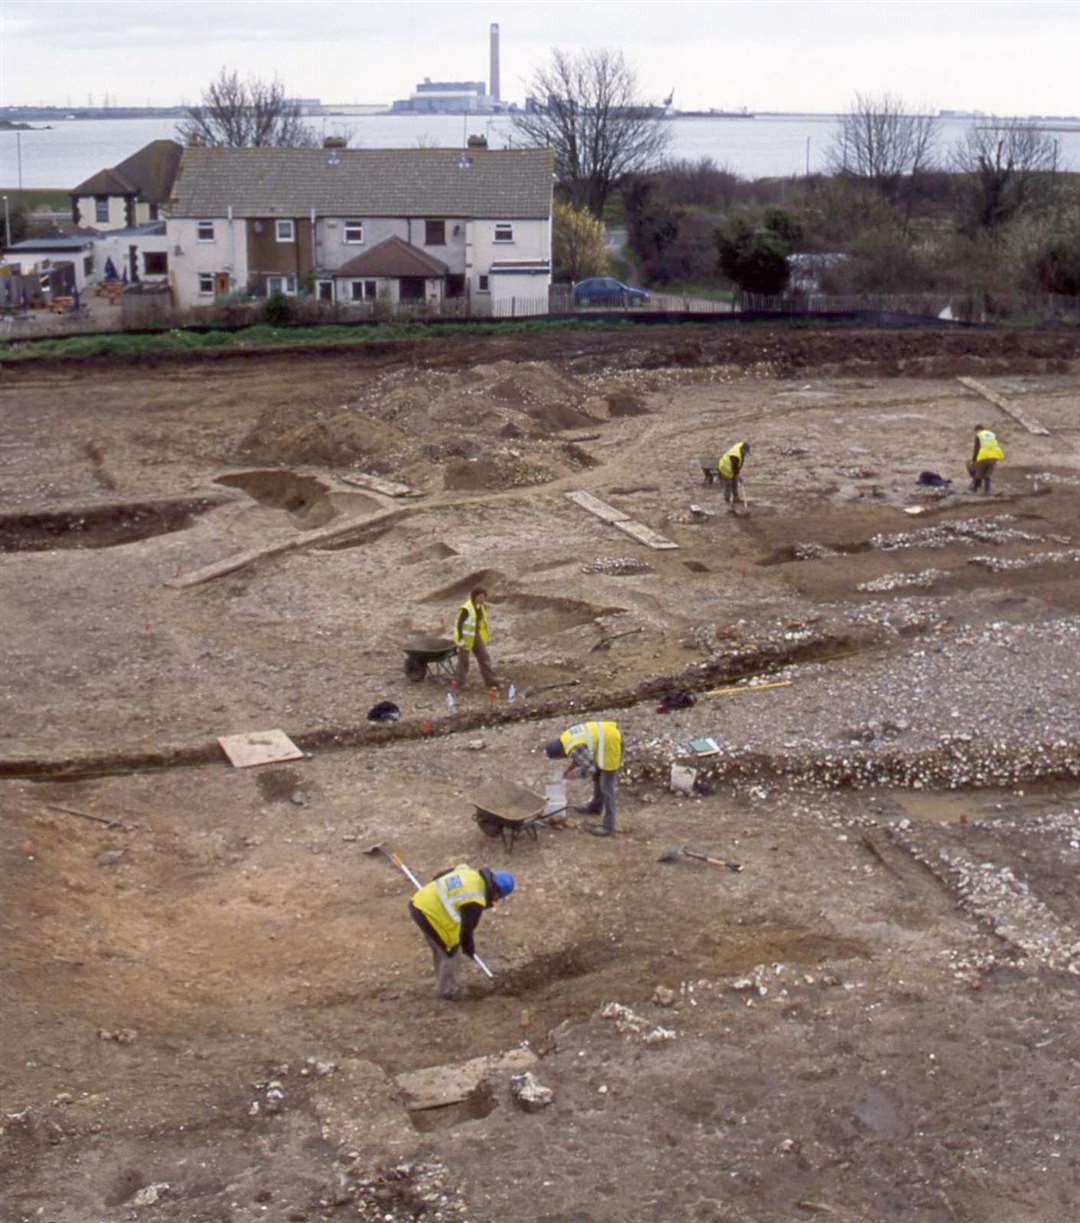 The archaeology site at Grange Farm in 2005. Image from Pre-Construct Archaeology